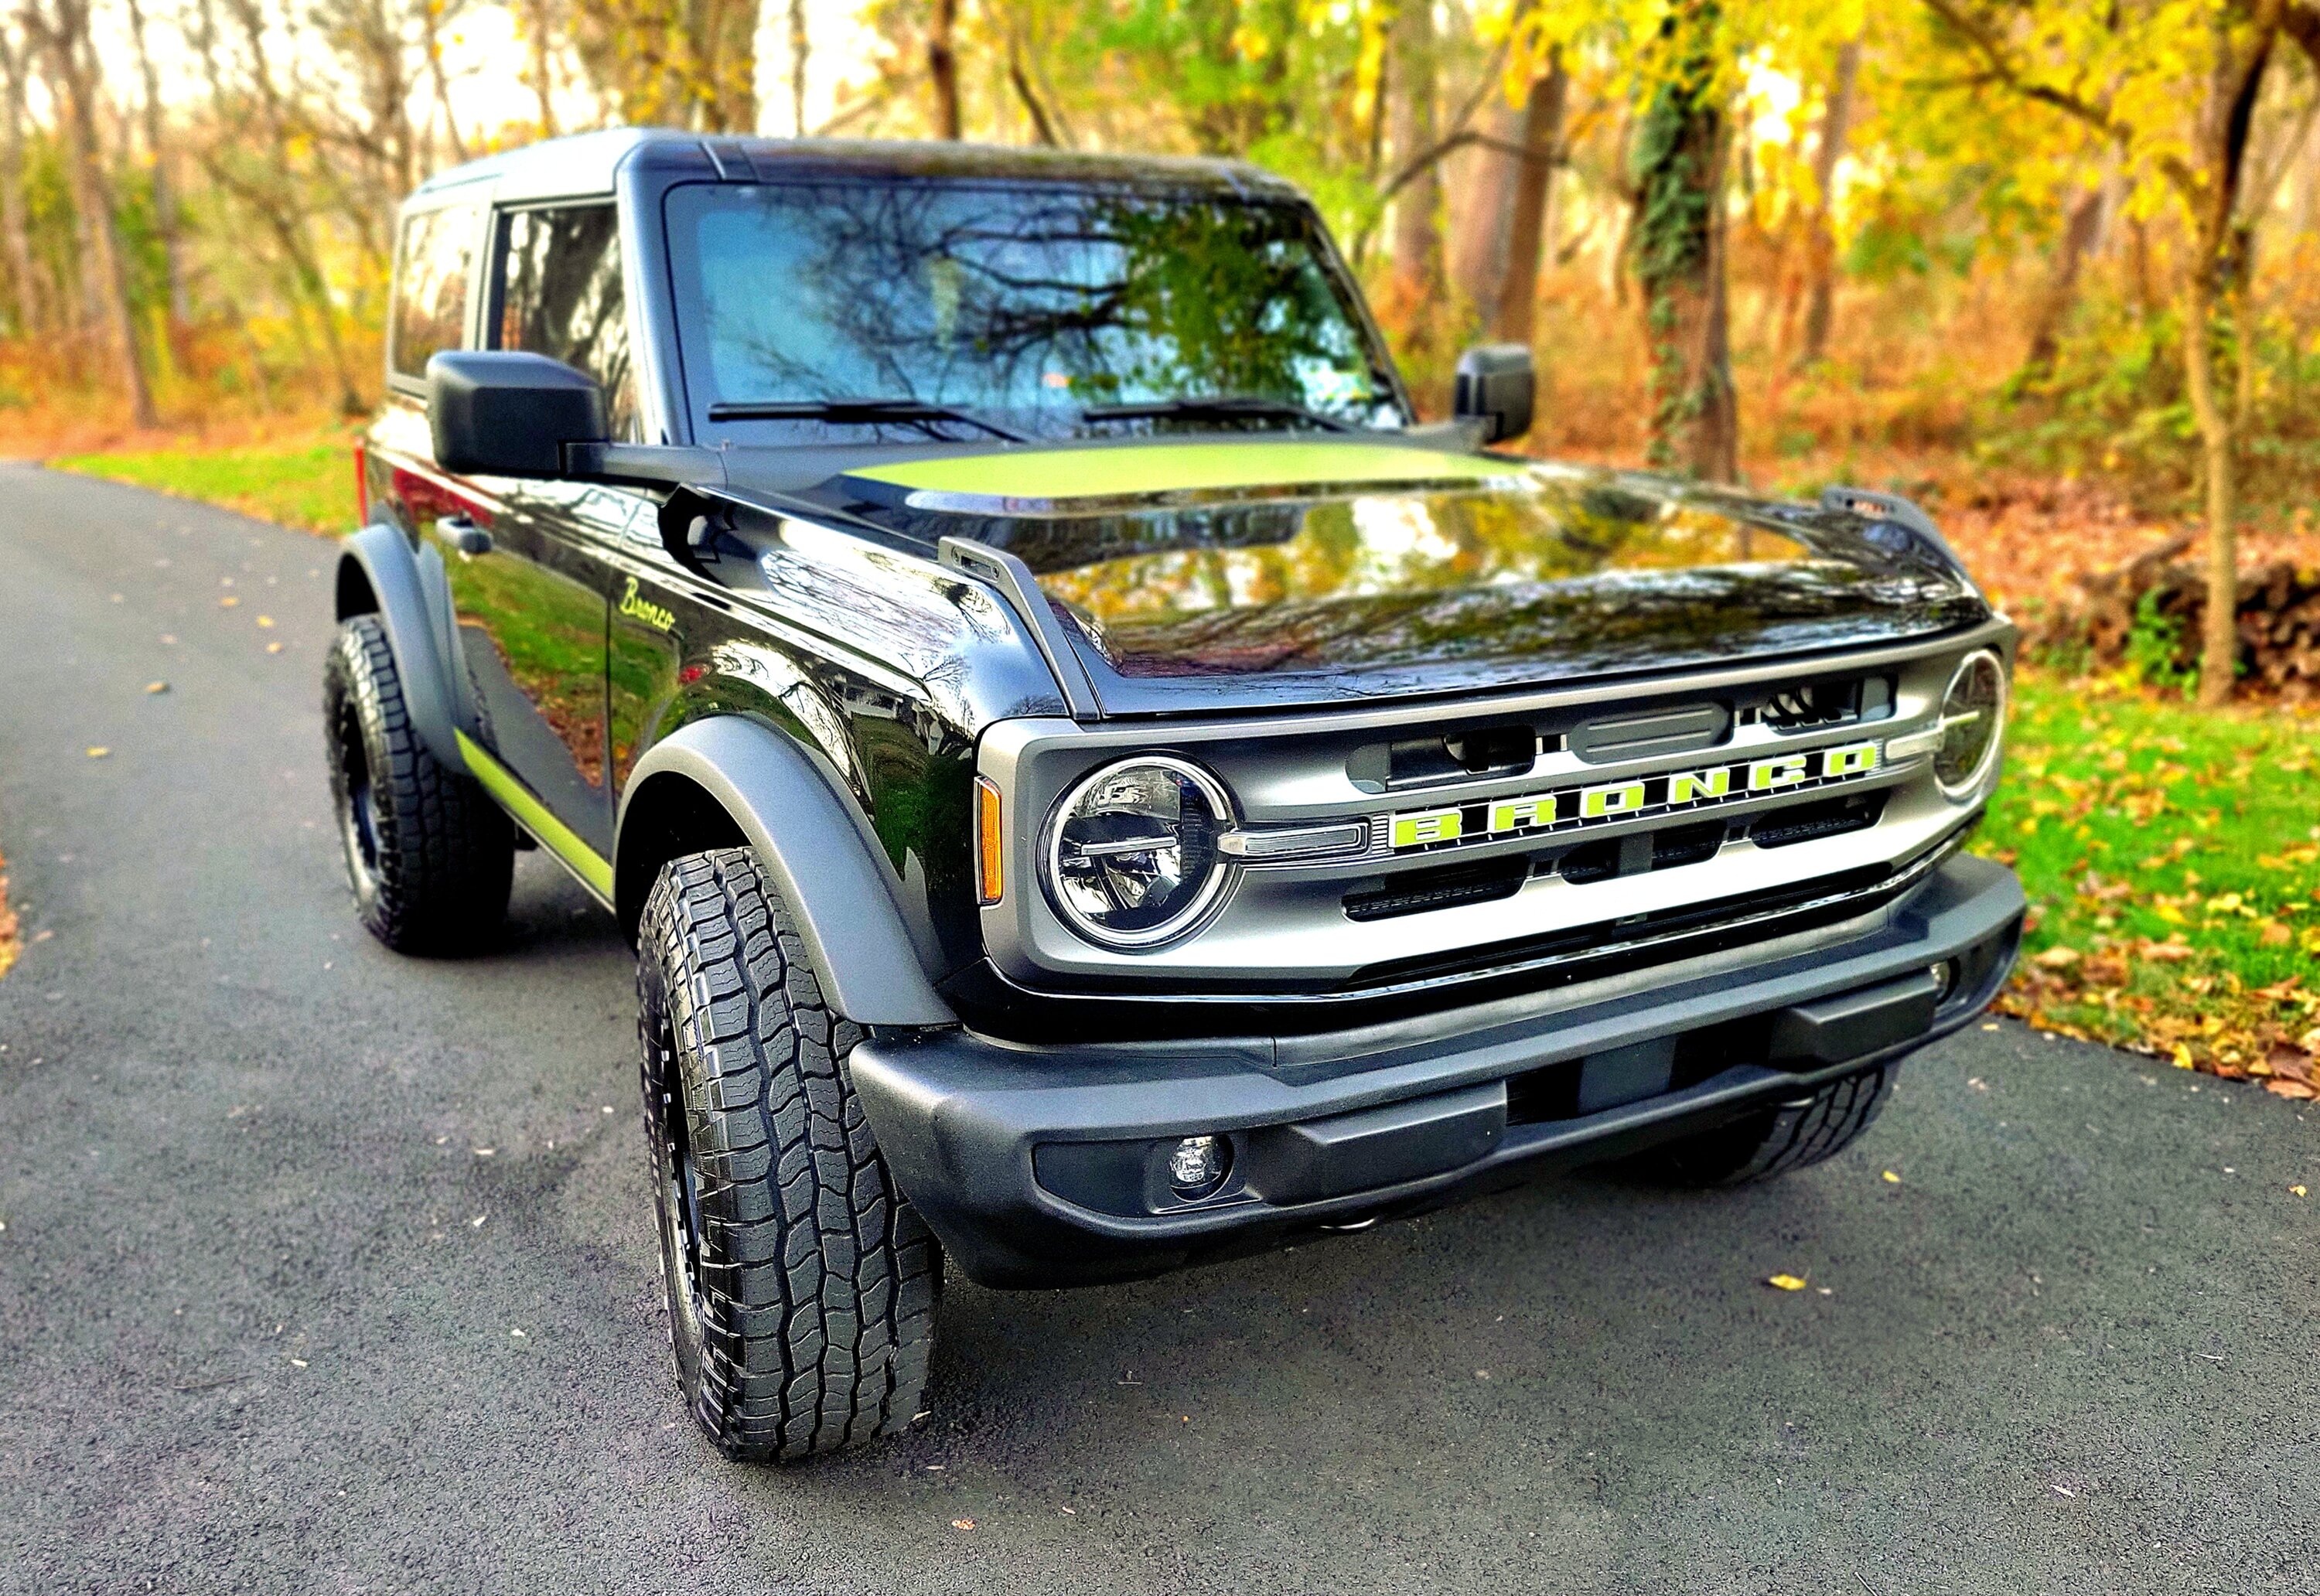 Ford Bronco Show 33's some love picture thread 20221108_164634